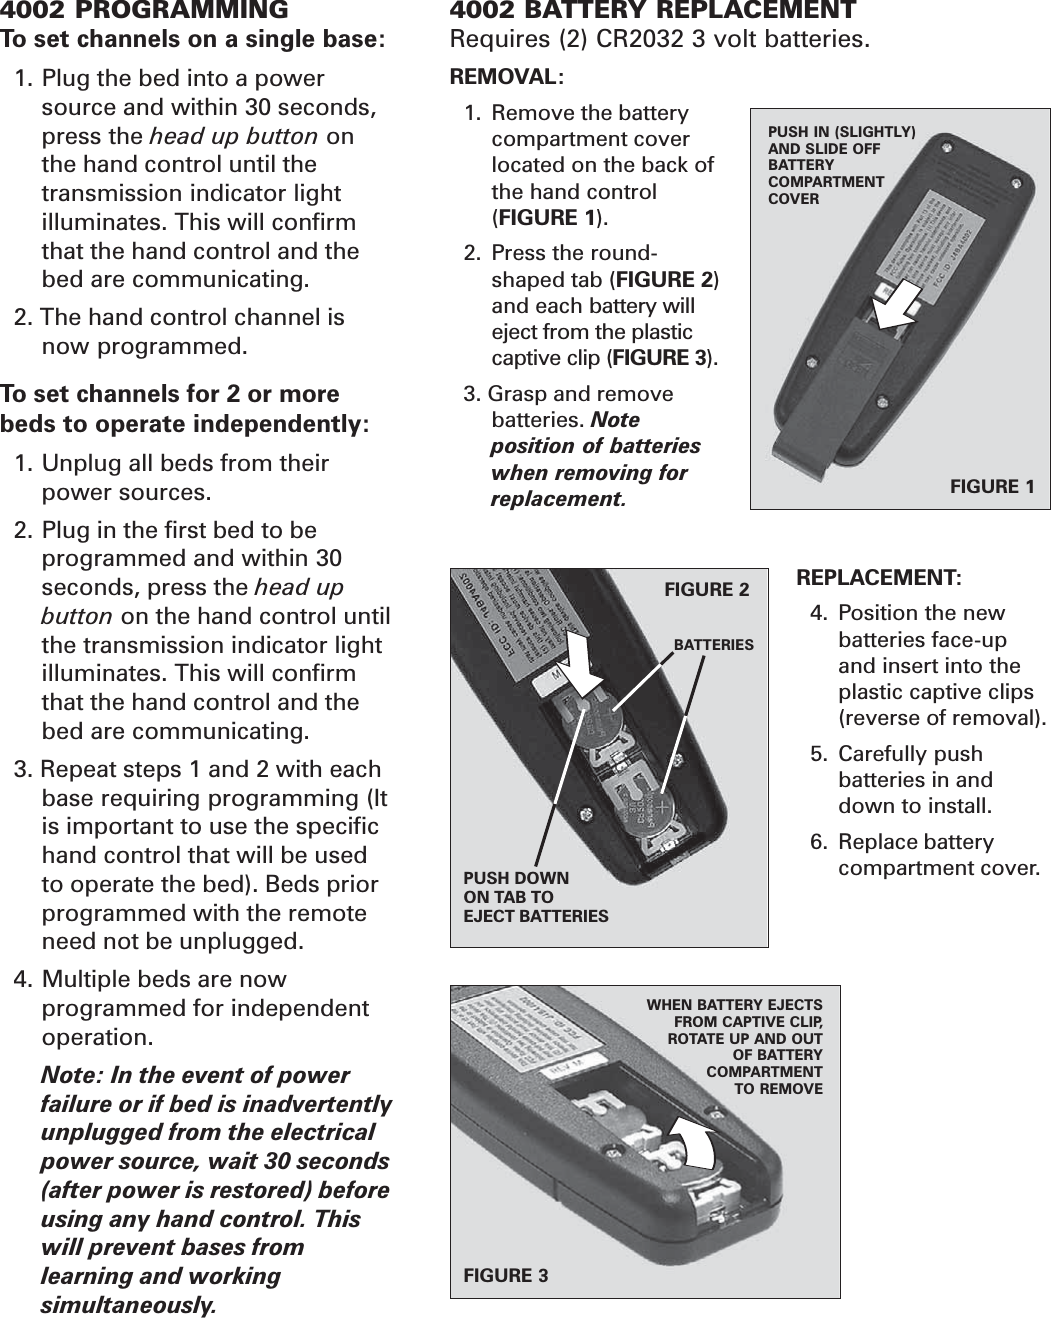 4002 BATTERY REPLACEMENTRequires (2) CR2032 3 volt batteries.REMOVAL:1. Remove the batterycompartment coverlocated on the back ofthe hand control(FIGURE 1).2. Press the round-shaped tab (FIGURE 2)and each battery willeject from the plasticcaptive clip (FIGURE 3).3. Grasp and removebatteries. Noteposition of batterieswhen removing forreplacement.REPLACEMENT:4. Position the newbatteries face-upand insert into theplastic captive clips(reverse of removal).5. Carefully pushbatteries in anddown to install.6. Replace batterycompartment cover.FIGURE 1PUSH IN (SLIGHTLY)AND SLIDE OFFBATTERYCOMPARTMENTCOVERFIGURE 3WHEN BATTERY EJECTSFROM CAPTIVE CLIP,ROTATE UP AND OUTOF BATTERYCOMPARTMENTTO REMOVE4002 PROGRAMMINGTo set channels on a single base:1. Plug the bed into a powersource and within 30 seconds,press the head up button onthe hand control until thetransmission indicator lightilluminates. This will confirmthat the hand control and thebed are communicating.2. The hand control channel isnow programmed.To set channels for 2 or morebeds to operate independently:1. Unplug all beds from theirpower sources.2. Plug in the first bed to beprogrammed and within 30seconds, press the head upbutton on the hand control untilthe transmission indicator lightilluminates. This will confirmthat the hand control and thebed are communicating.3. Repeat steps 1 and 2 with eachbase requiring programming (Itis important to use the specifichand control that will be usedto operate the bed). Beds priorprogrammed with the remoteneed not be unplugged.4. Multiple beds are nowprogrammed for independentoperation.Note: In the event of powerfailure or if bed is inadvertentlyunplugged from the electricalpower source, wait 30 seconds(after power is restored) beforeusing any hand control. Thiswill prevent bases fromlearning and workingsimultaneously.FIGURE 2PUSH DOWNON TAB TOEJECT BATTERIESBATTERIES